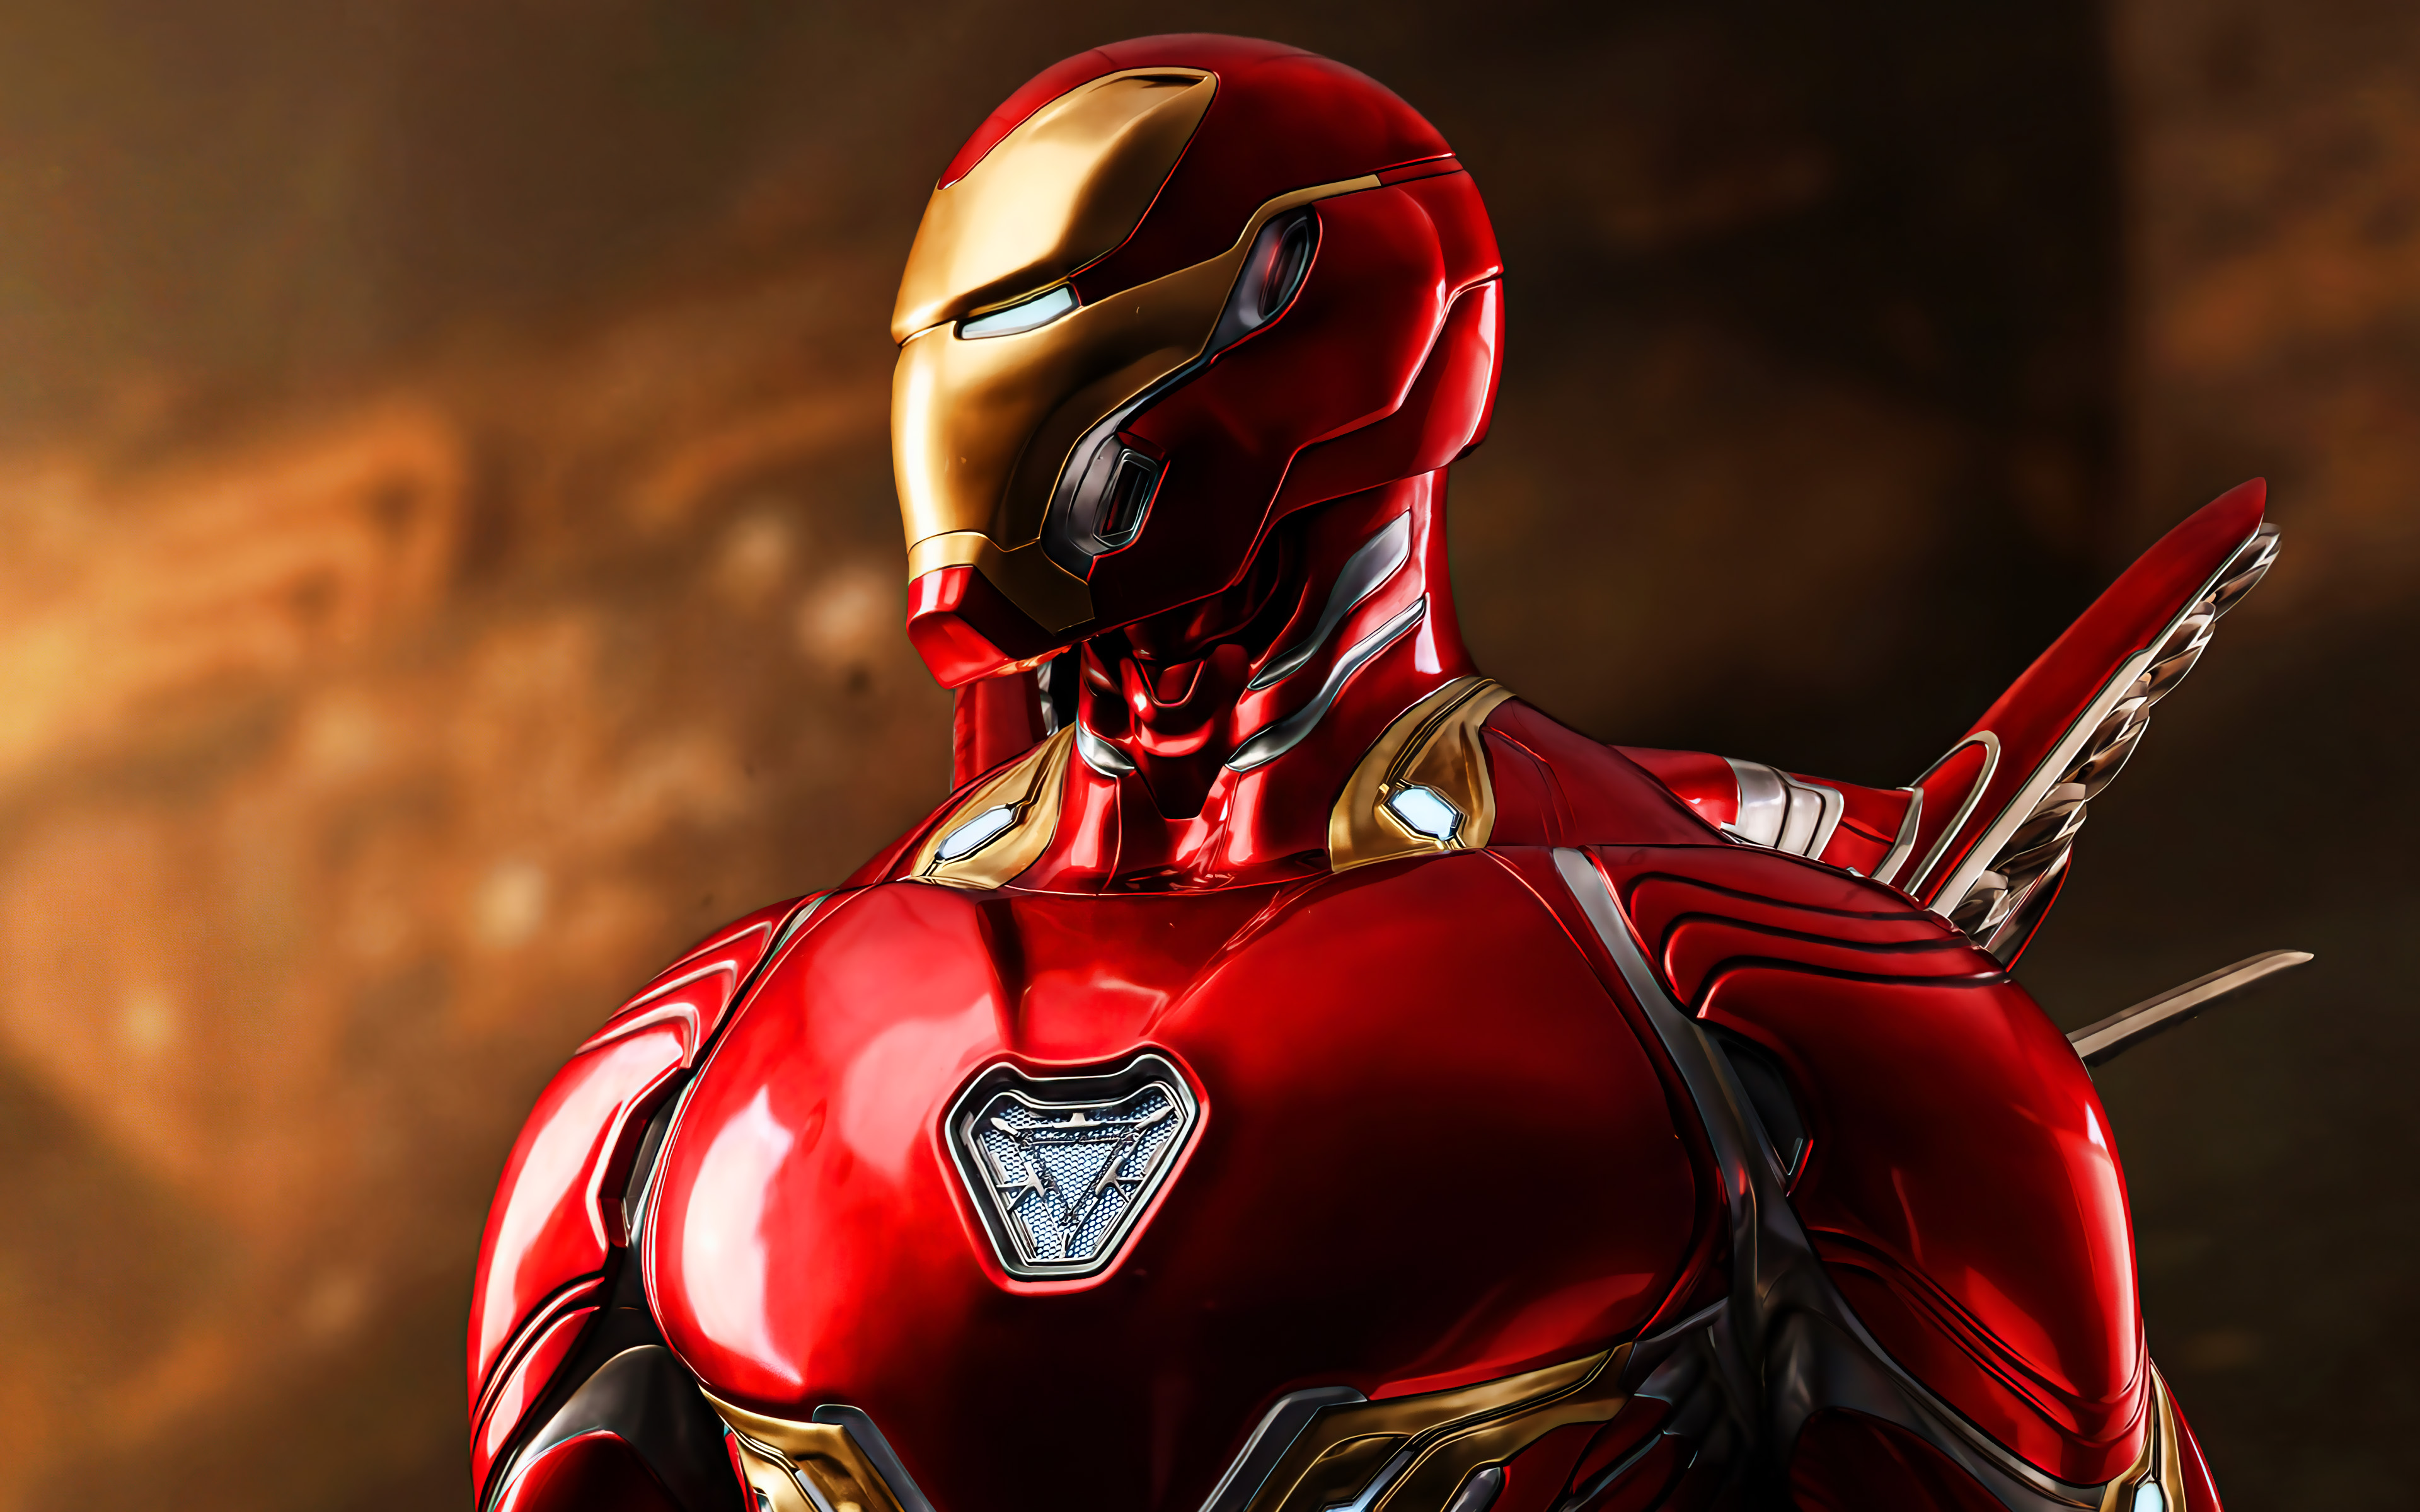 Download wallpapers 4k, IronMan, 3D art, superheroes, Marvel Comics, IronMan  4K, battle, creative, Iron Man 3D for desktop with resolution 3840x2400.  High Quality HD pictures wallpapers